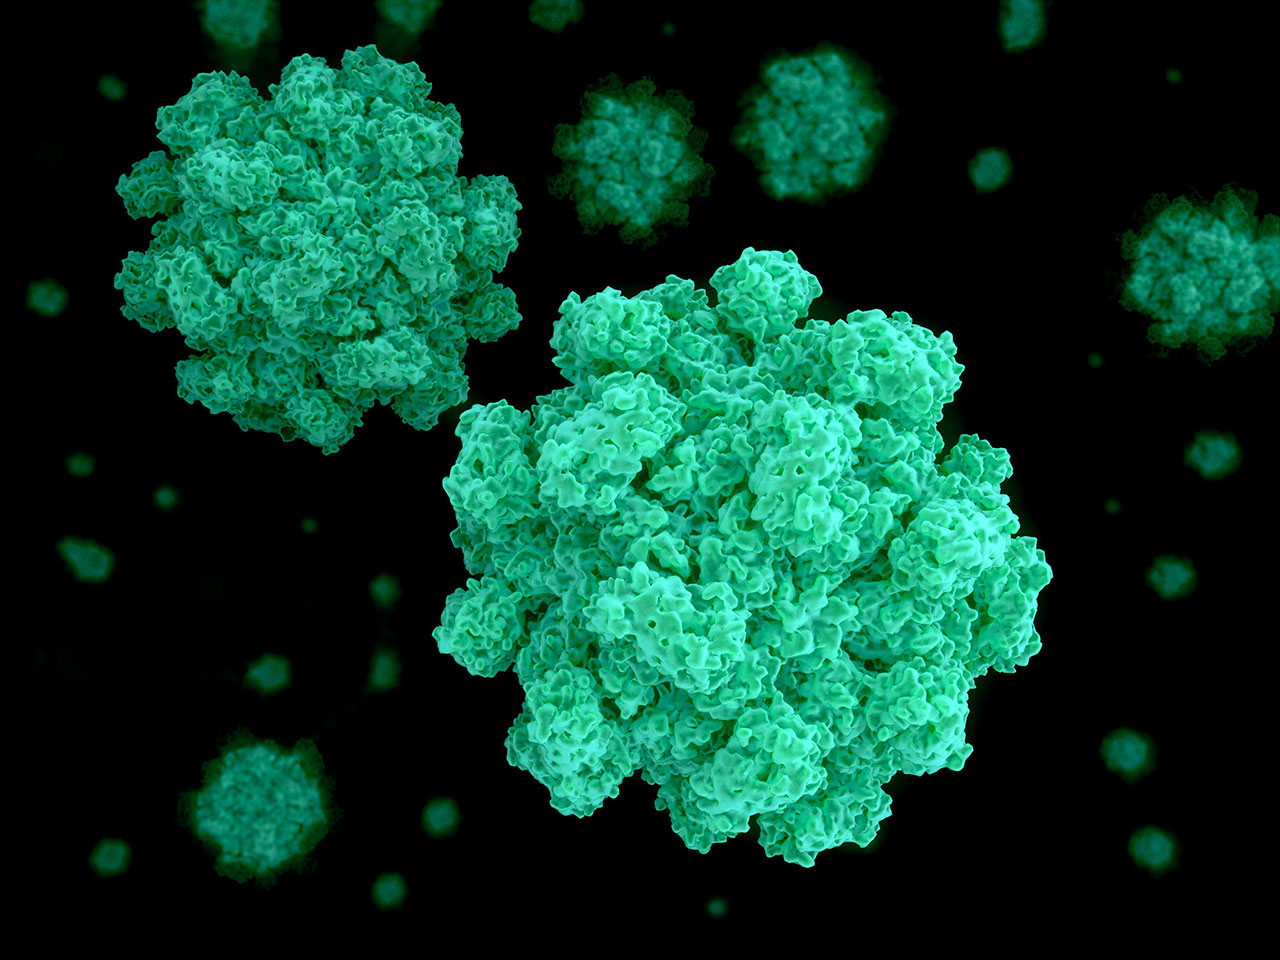 An up-close view of norovirus - also called cruise ship virus or stomach flu.